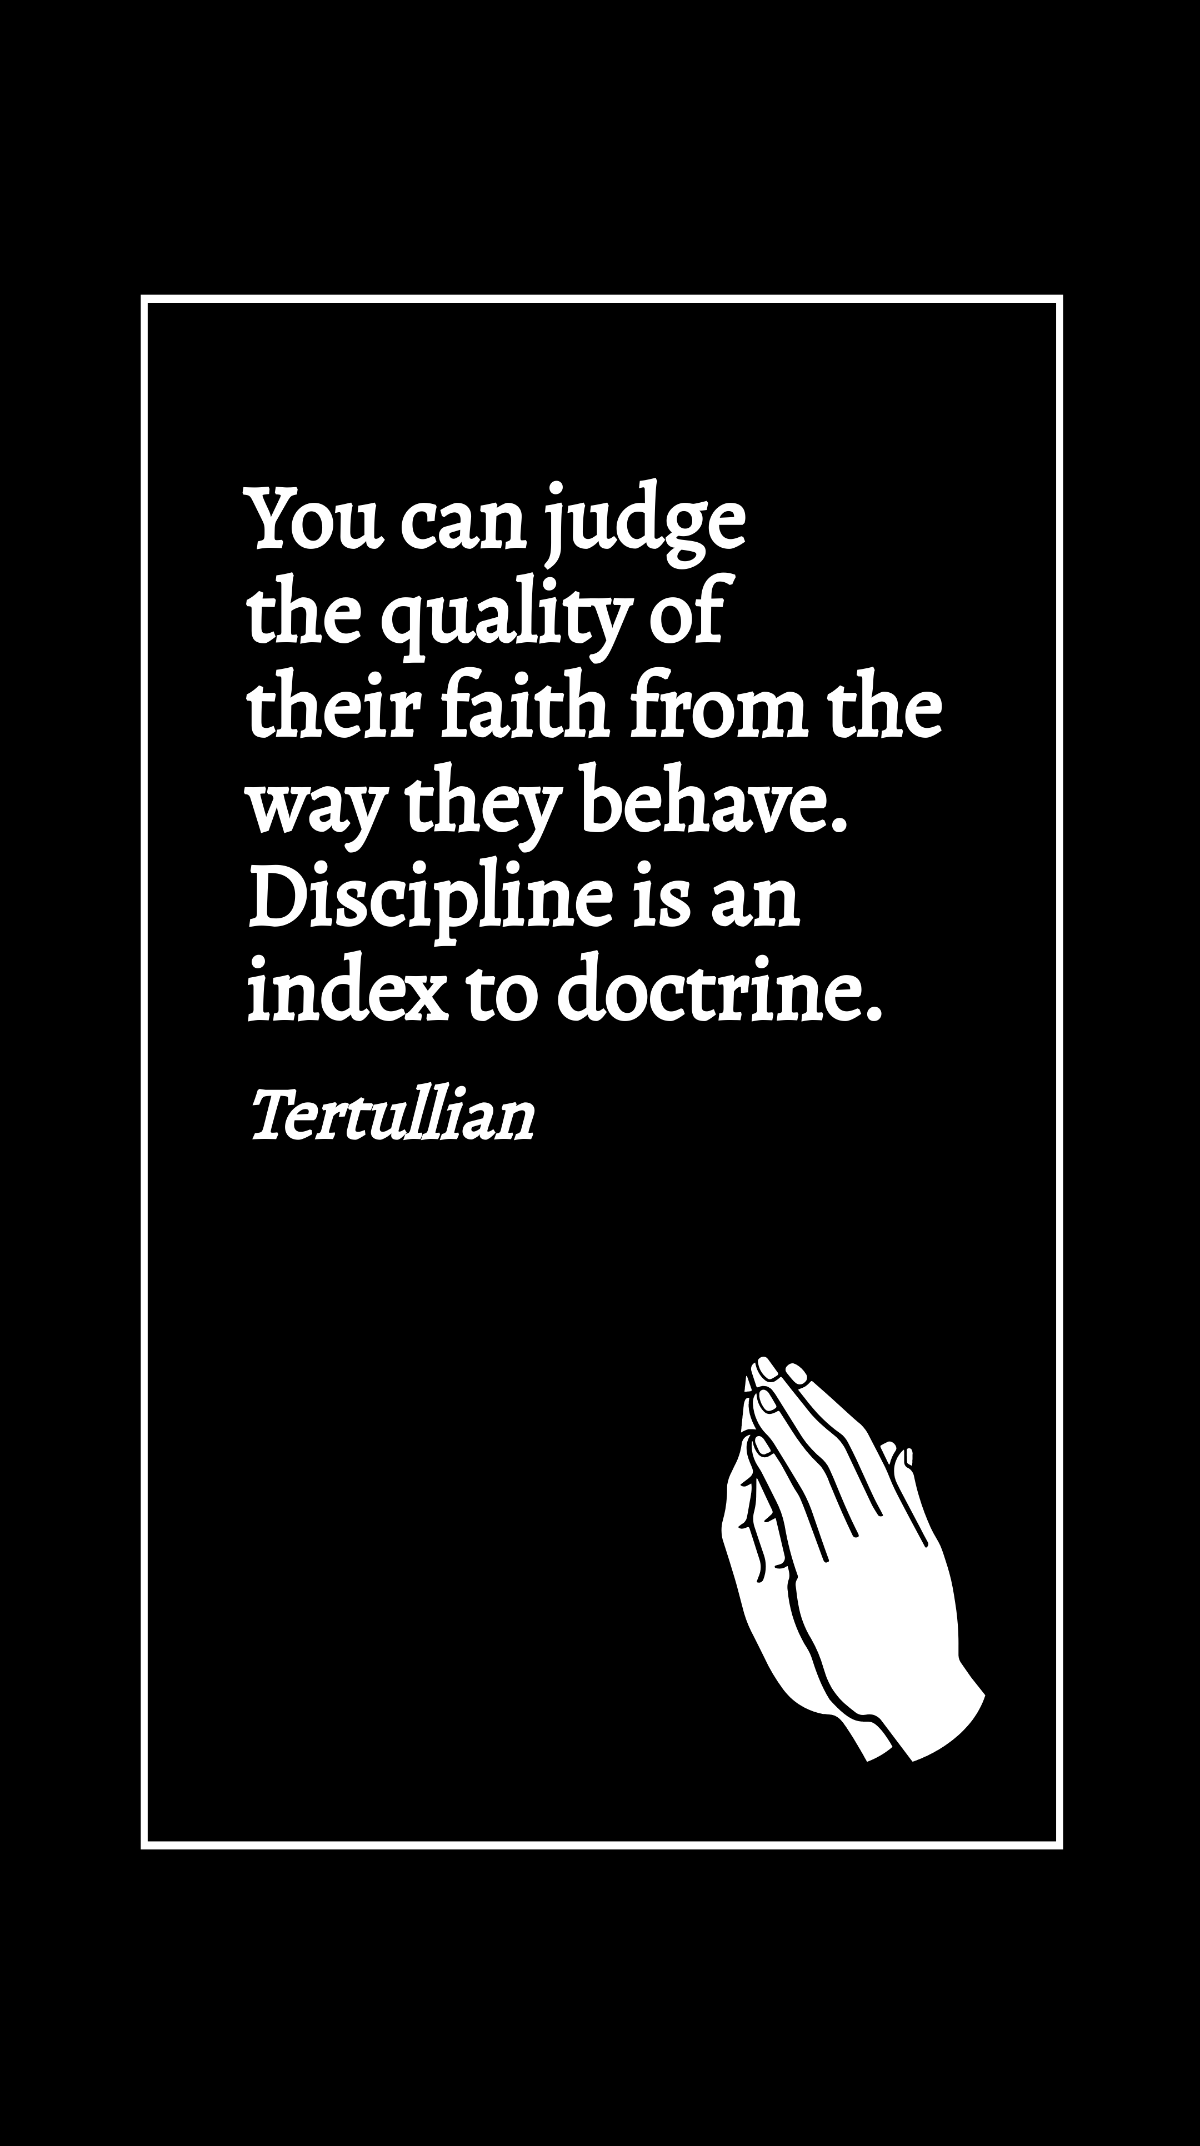 Tertullian - You can judge the quality of their faith from the way they behave. Discipline is an index to doctrine. Template